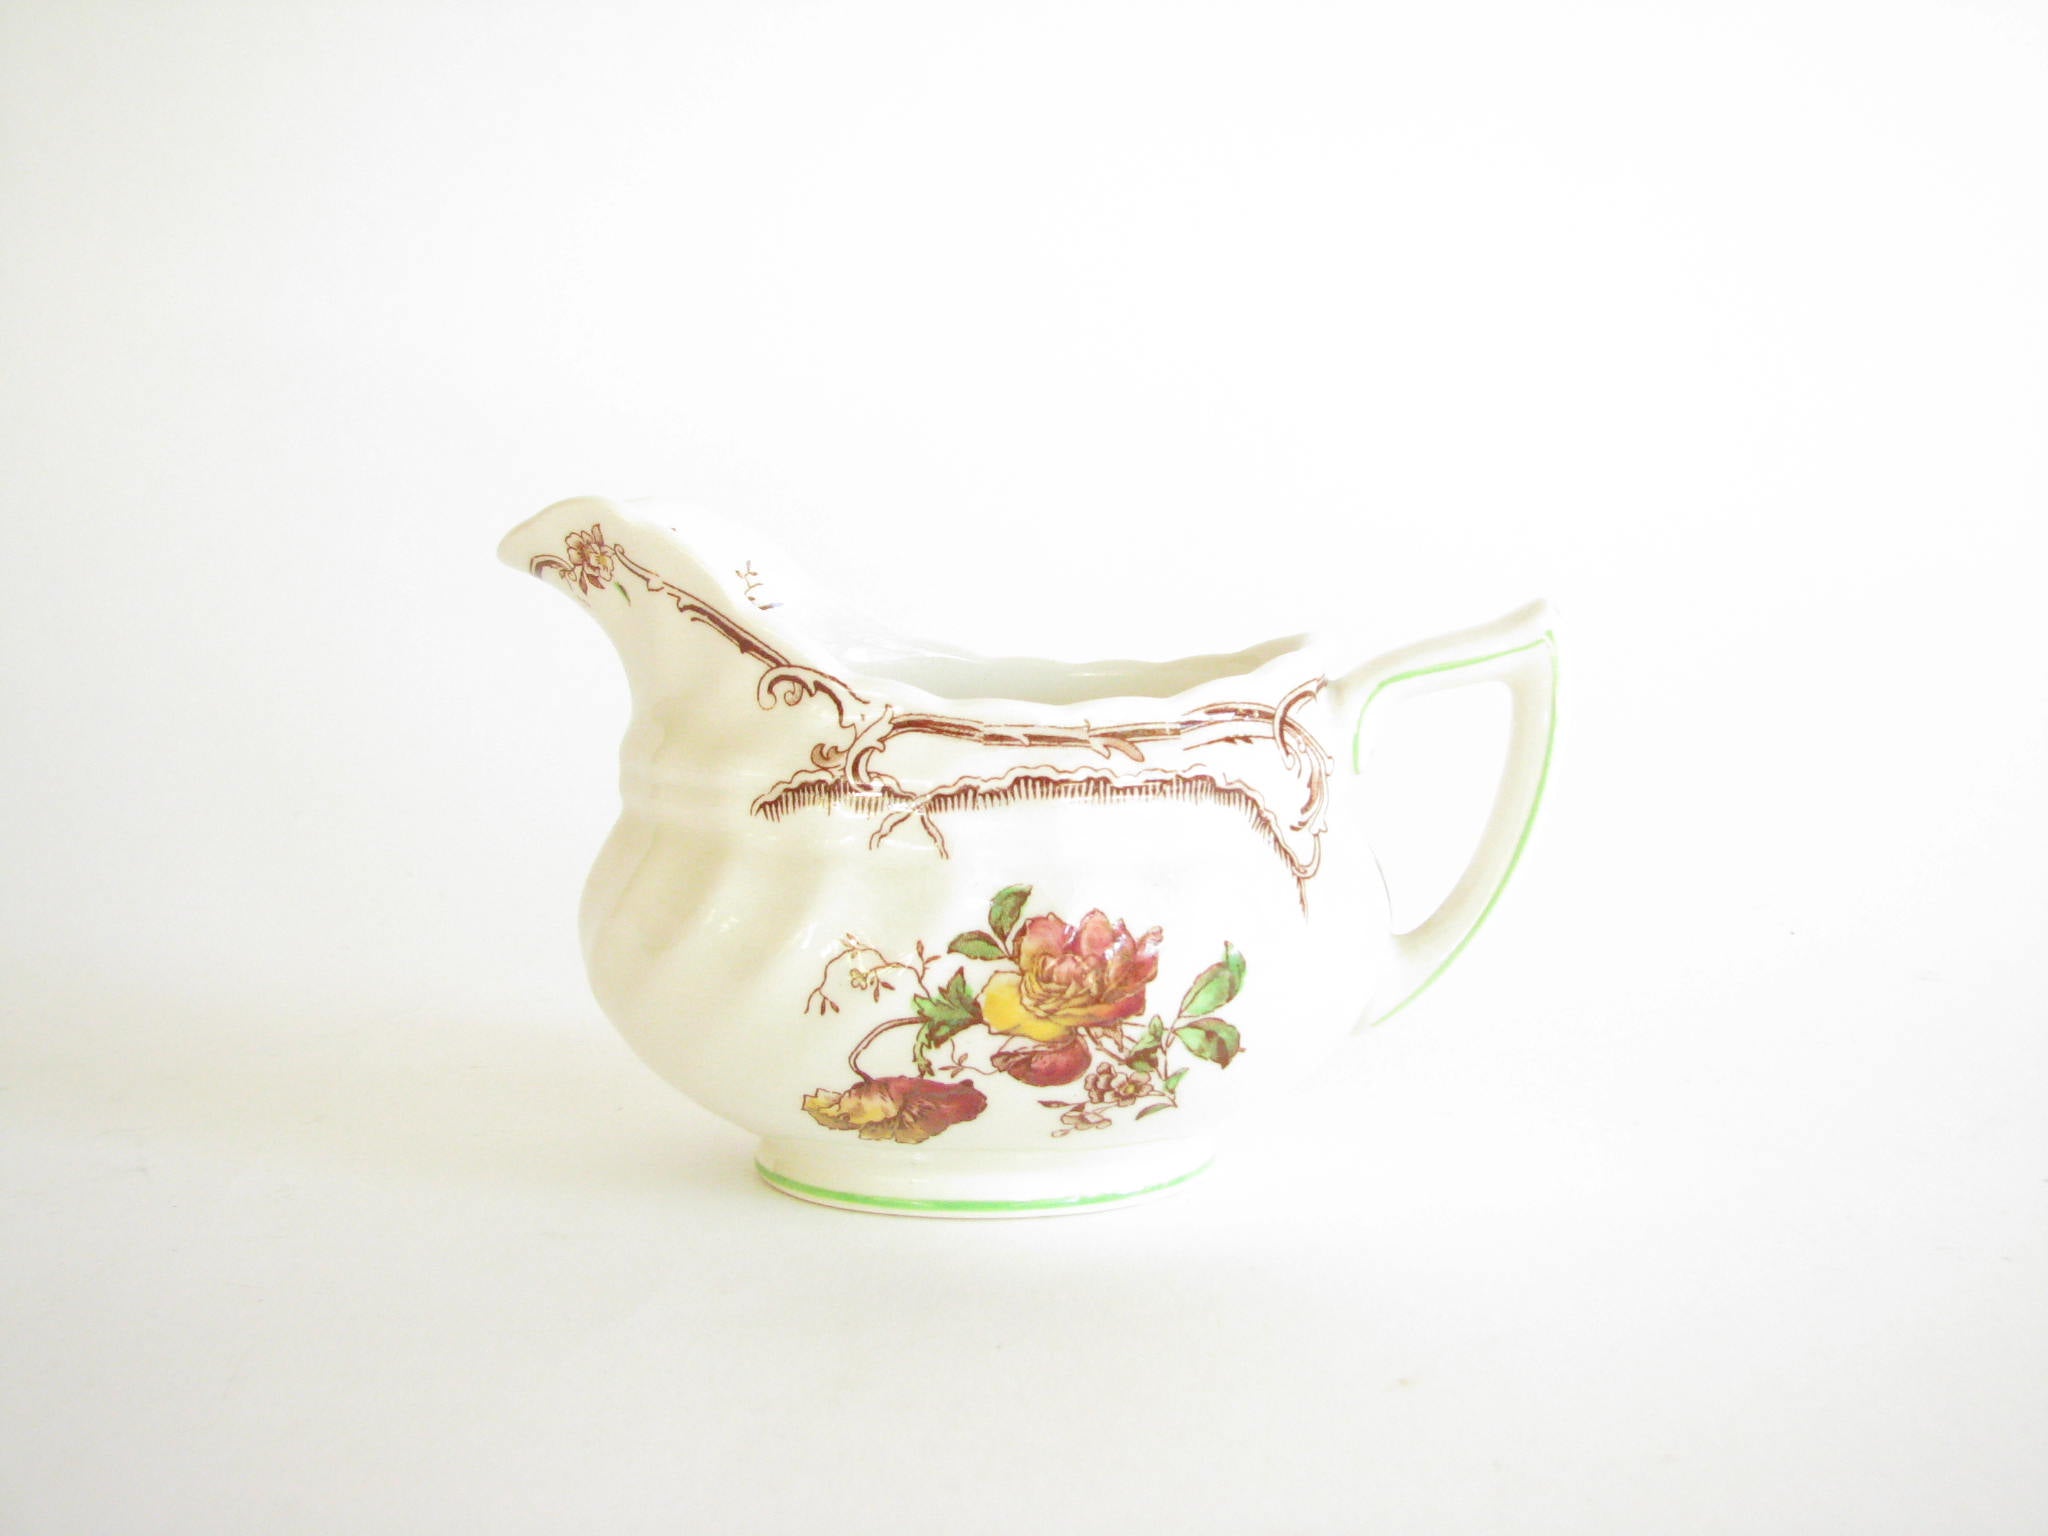 edgebrookhouse - Vintage Royal Doulton Chiltern Earthenware Creamer with Floral Design